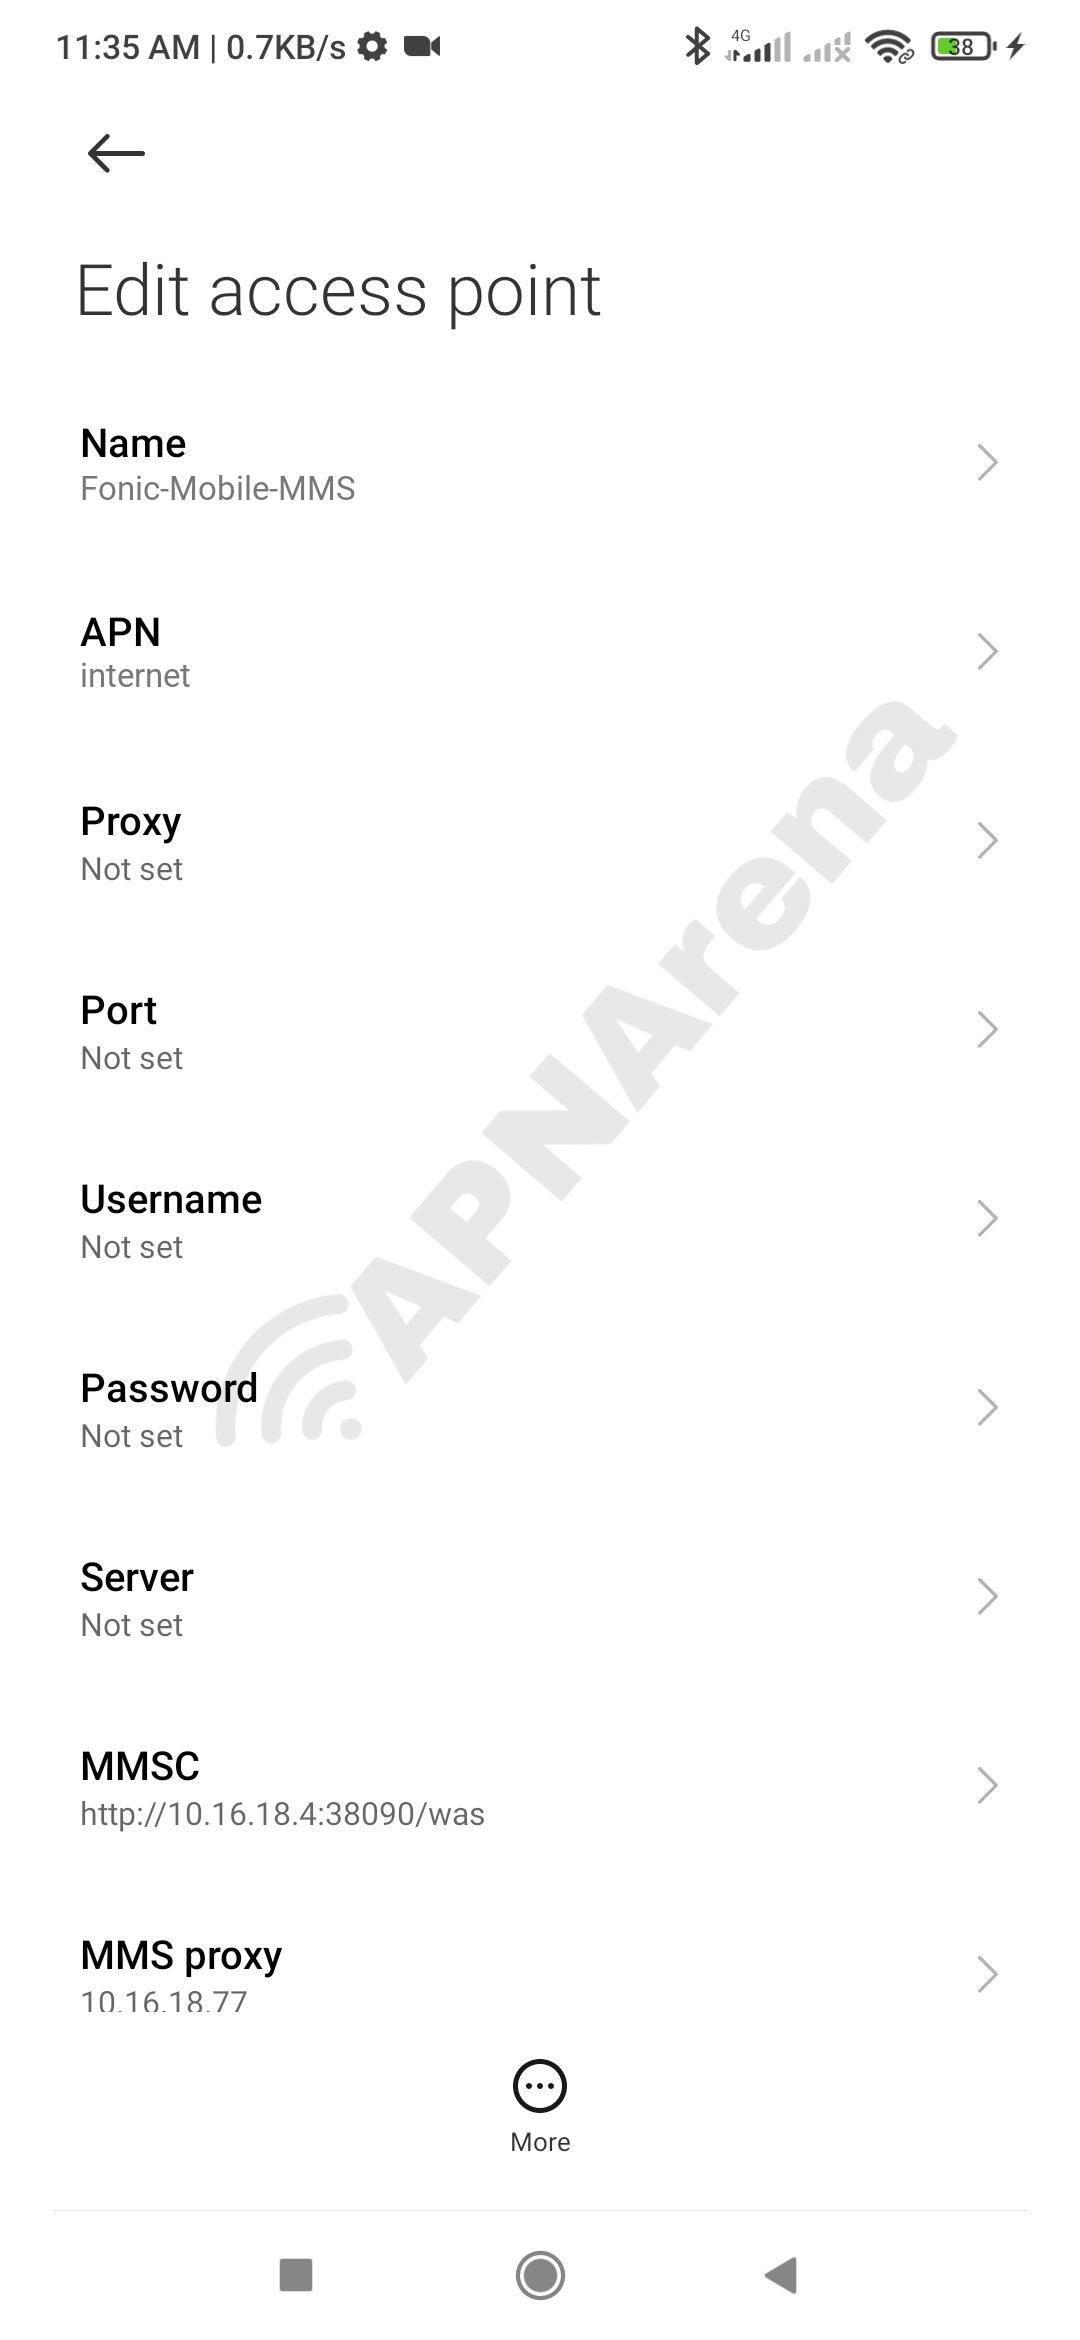 Fonic mobile (ex Lidl) MMS Settings for Android